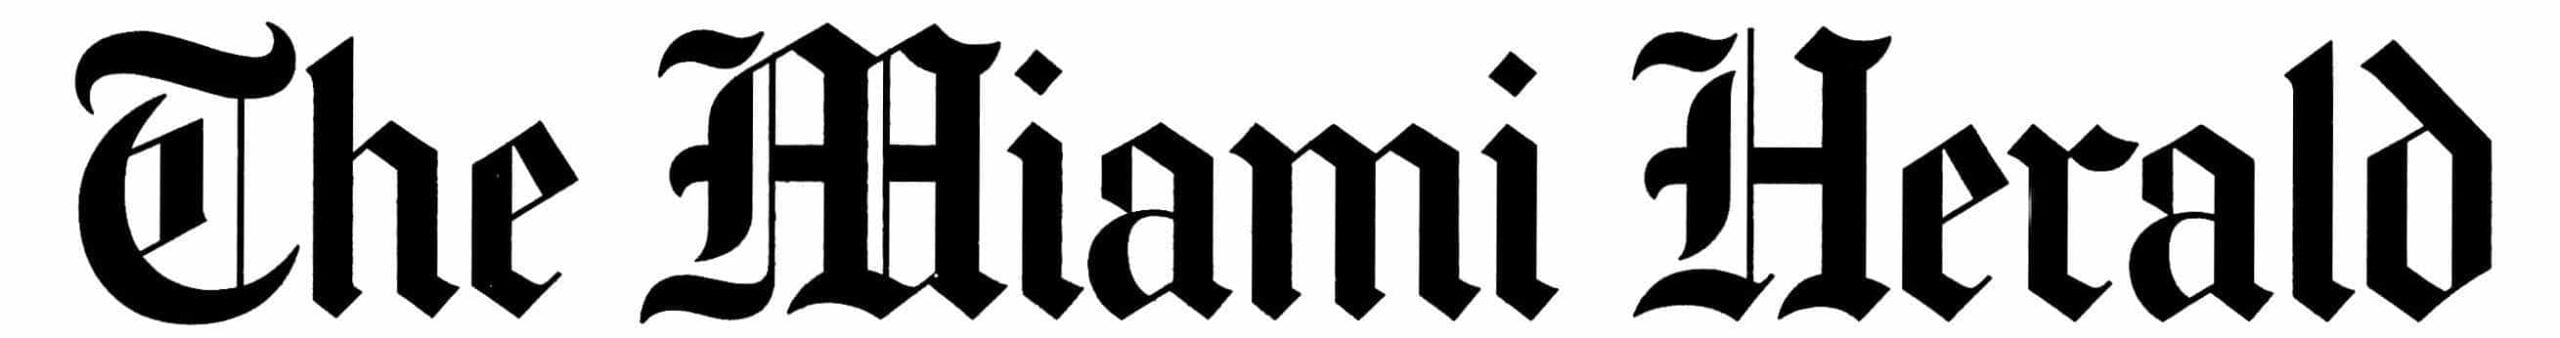 The Miami Herald logo for article where Senate Bill to combat painkiller abuse is discussed